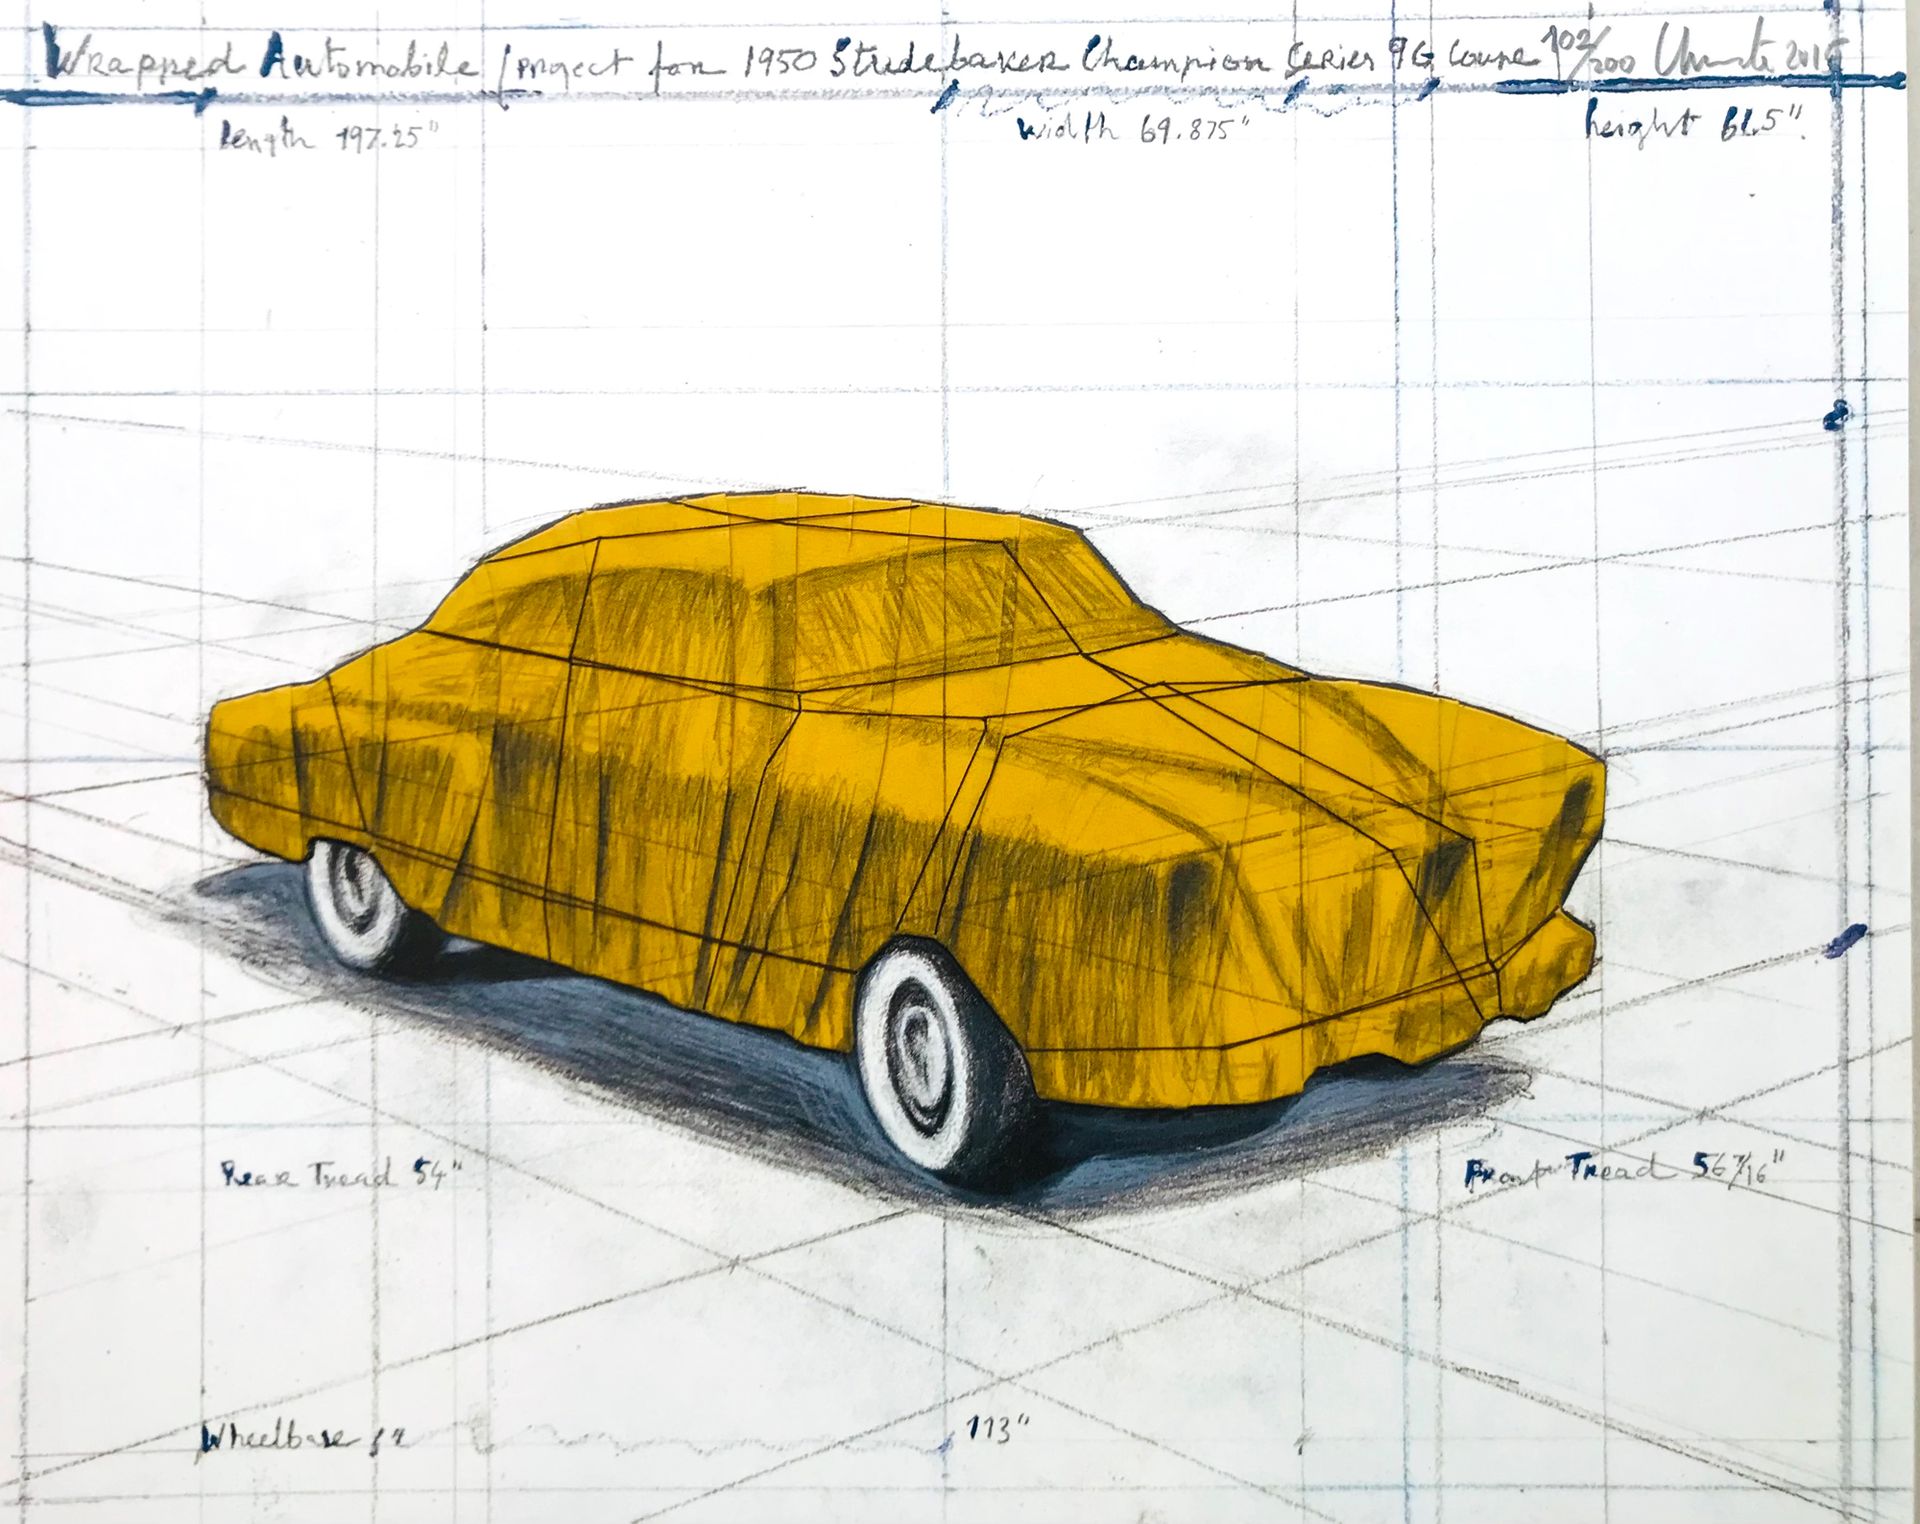 CHRISTO Javacheff (1935-2020) Packaged Automobile (Project for a 1950 Studebaker&hellip;